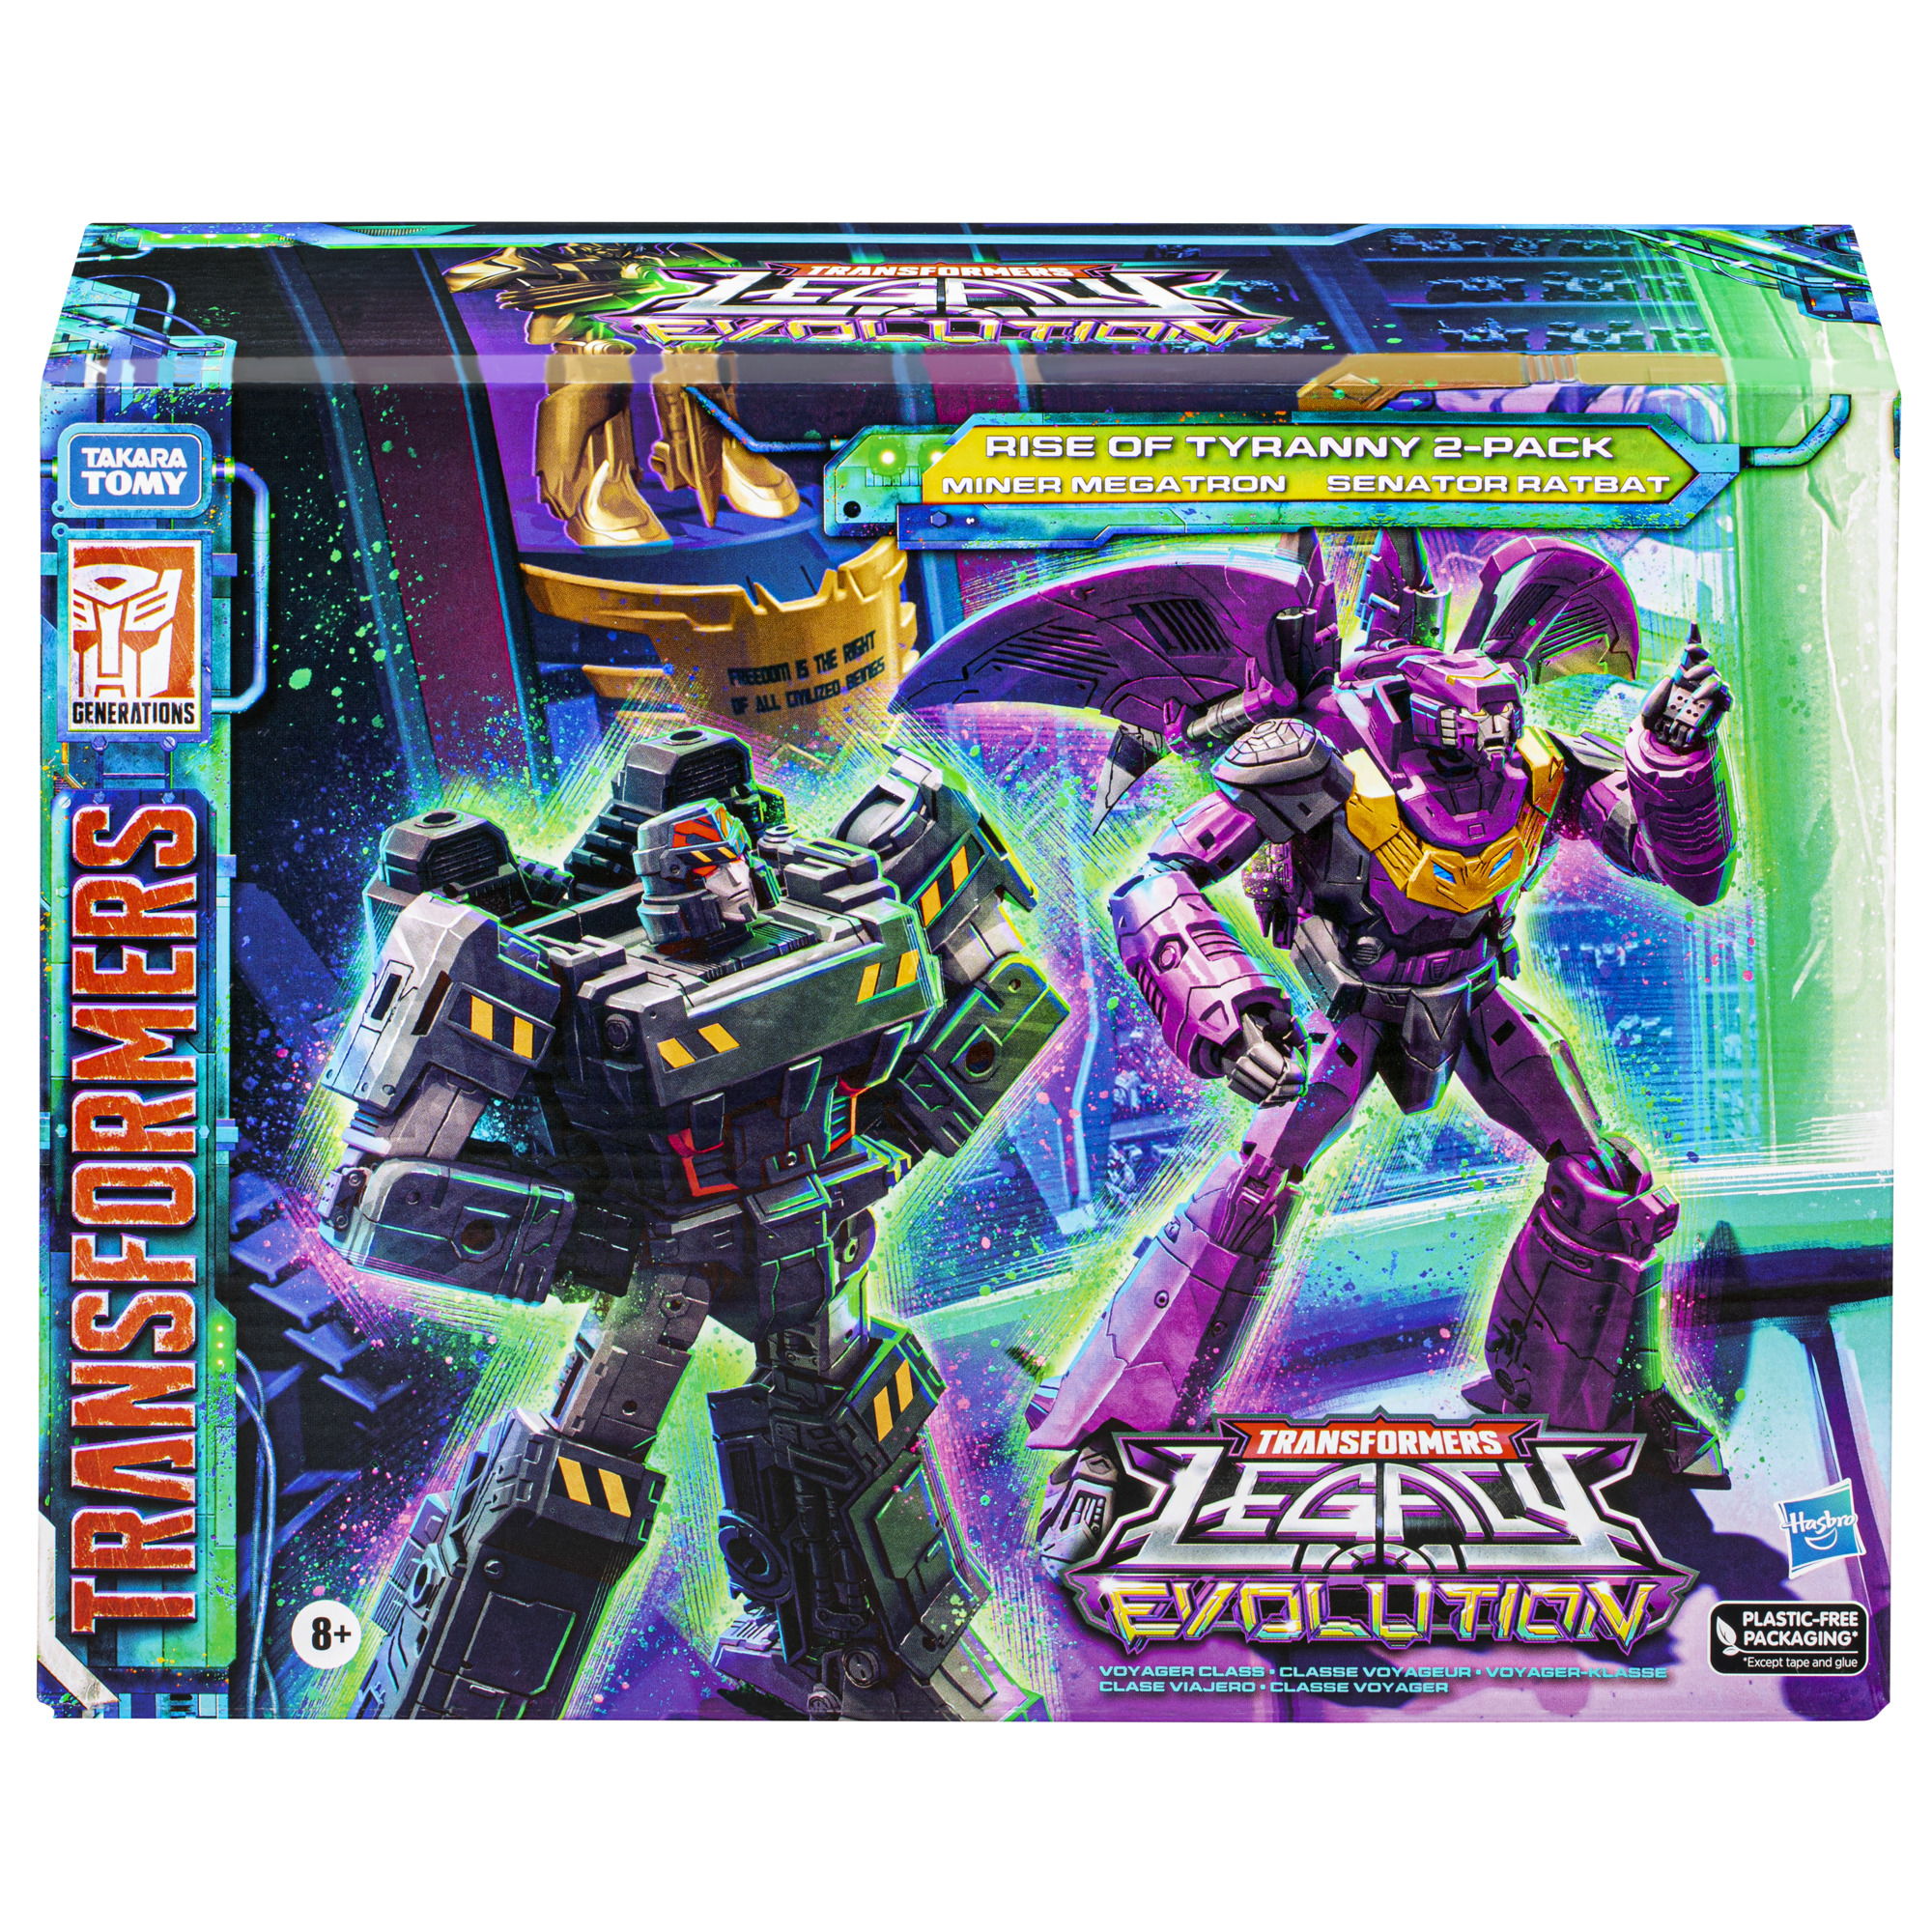 Transformers Legacy: Evolution Rise of Tyranny 2-Pack